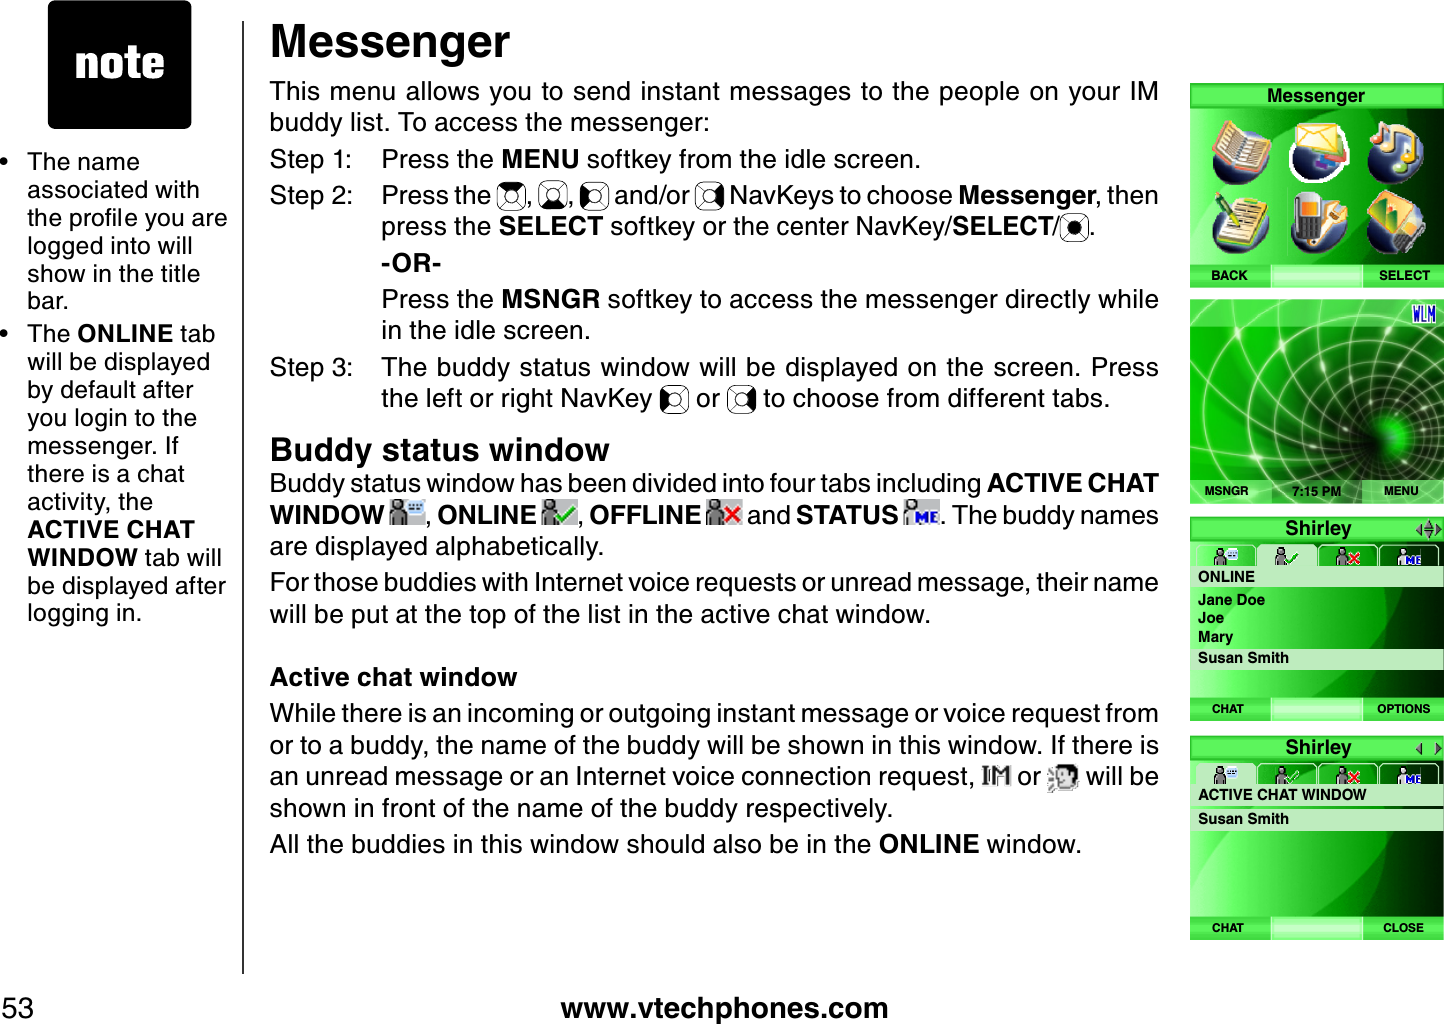 www.vtechphones.com53MessengerThis menu allows you to send instant messages to the people on your IM buddy list. To access the messenger:Step 1: Press the MENU softkey from the idle screen.Step 2: Press the  ,  ,   and/or   NavKeys to choose Messenger, then press the SELECT softkey or the center NavKey/SELECT/ .    -OR-    Press the MSNG R softkey to access the messenger directly while in the idle screen.Step 3: The buddy status window will be displayed on the screen. Press the left or right NavKey   or   to choose from different tabs.Buddy status windowB uddy status window has been divided into four tabs including ACTIVE CH AT WINDOW  , ONLINE  , OFFLINE   and STATUS  . The buddy names are displayed alphabetically.For those buddies with Internet voice req uests or unread message, their name will be put at the top of the list in the active chat window. Active chat windowWhile there is an incoming or outgoing instant message or voice req uest from or to a buddy, the name of the buddy will be shown in this window. If there is an unread message or an Internet voice connection req uest,   or   will be shown in front of the name of the buddy respectively.All the buddies in this window should also be in the ONLINE window.SELECTMessengerBACK7:15 PMMENUMSNGRShirleyONLINEOPTIONSCHATJane DoeJoeMarySusan SmithThe name associated with VJGRTQſNG[QWCTGlogged into will show in the title bar.The ONLINE tab will be displayed by default after you login to the messenger. If there is a chat activity, the ACTIVE CH AT WINDOW tab will be displayed after logging in.••ShirleyACTIVE CHAT WINDOWSusan SmithCLOSECHAT